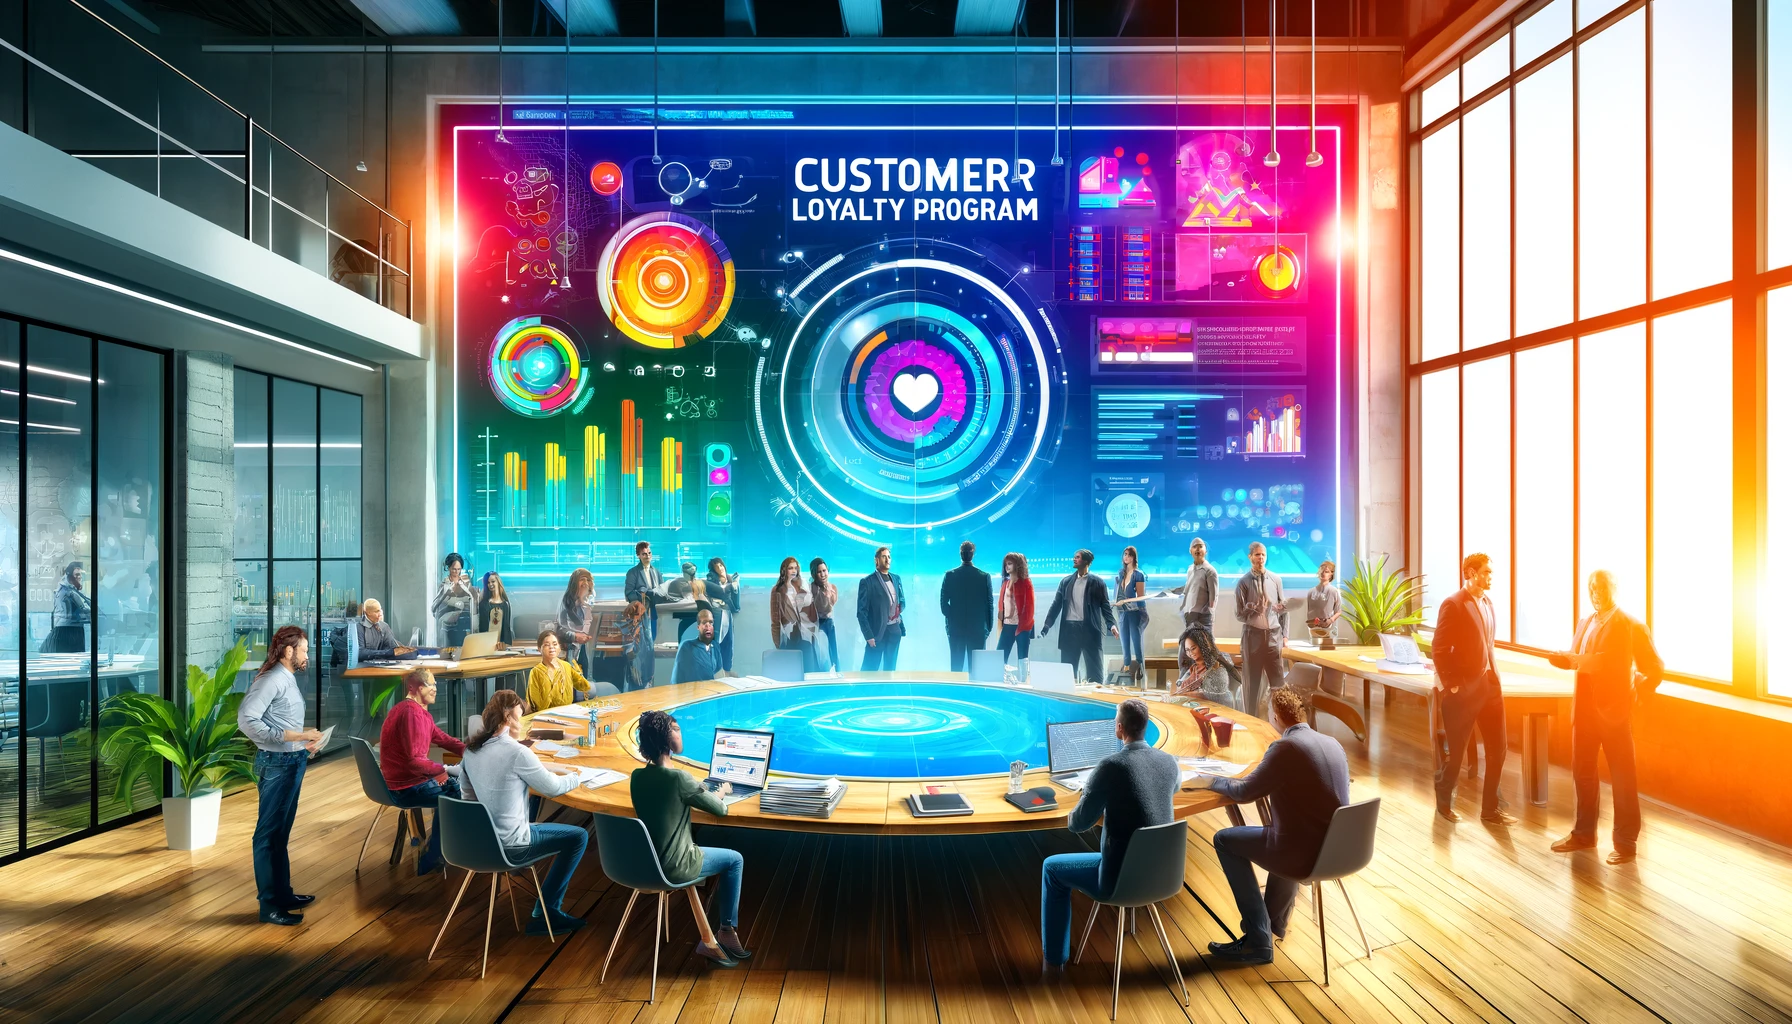 A vibrant illustration showing a diverse group of professionals around a large touchscreen table in a modern office setting. The table displays an interactive customer loyalty program dashboard. This scene highlights a collaborative effort, with team members from various backgrounds engaging in discussions and analyses. The style is colorful and slightly abstract, emphasizing creativity and the integration of technology in business practices. Key visual elements include digital graphs, flow charts, and dynamic interfaces, all set in a bright, tech-inspired workspace.